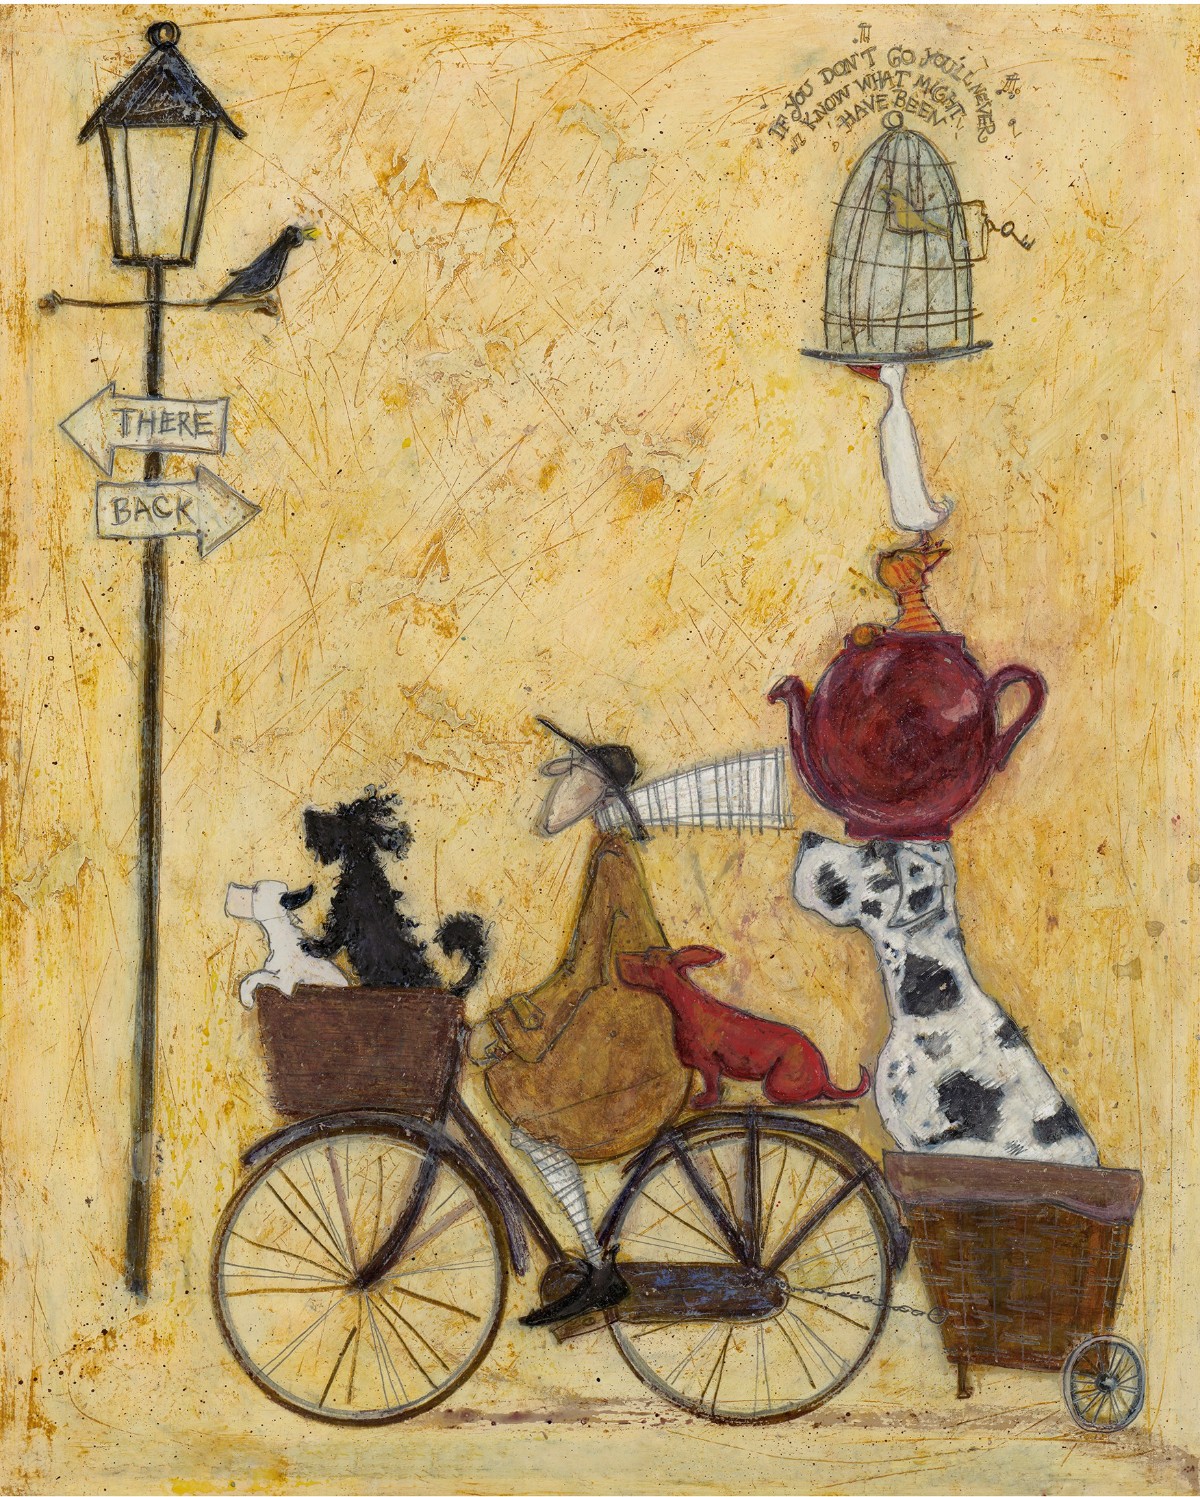 We\u0027re not lost, we\u0027re on our way - AP Remarque by Sam Toft